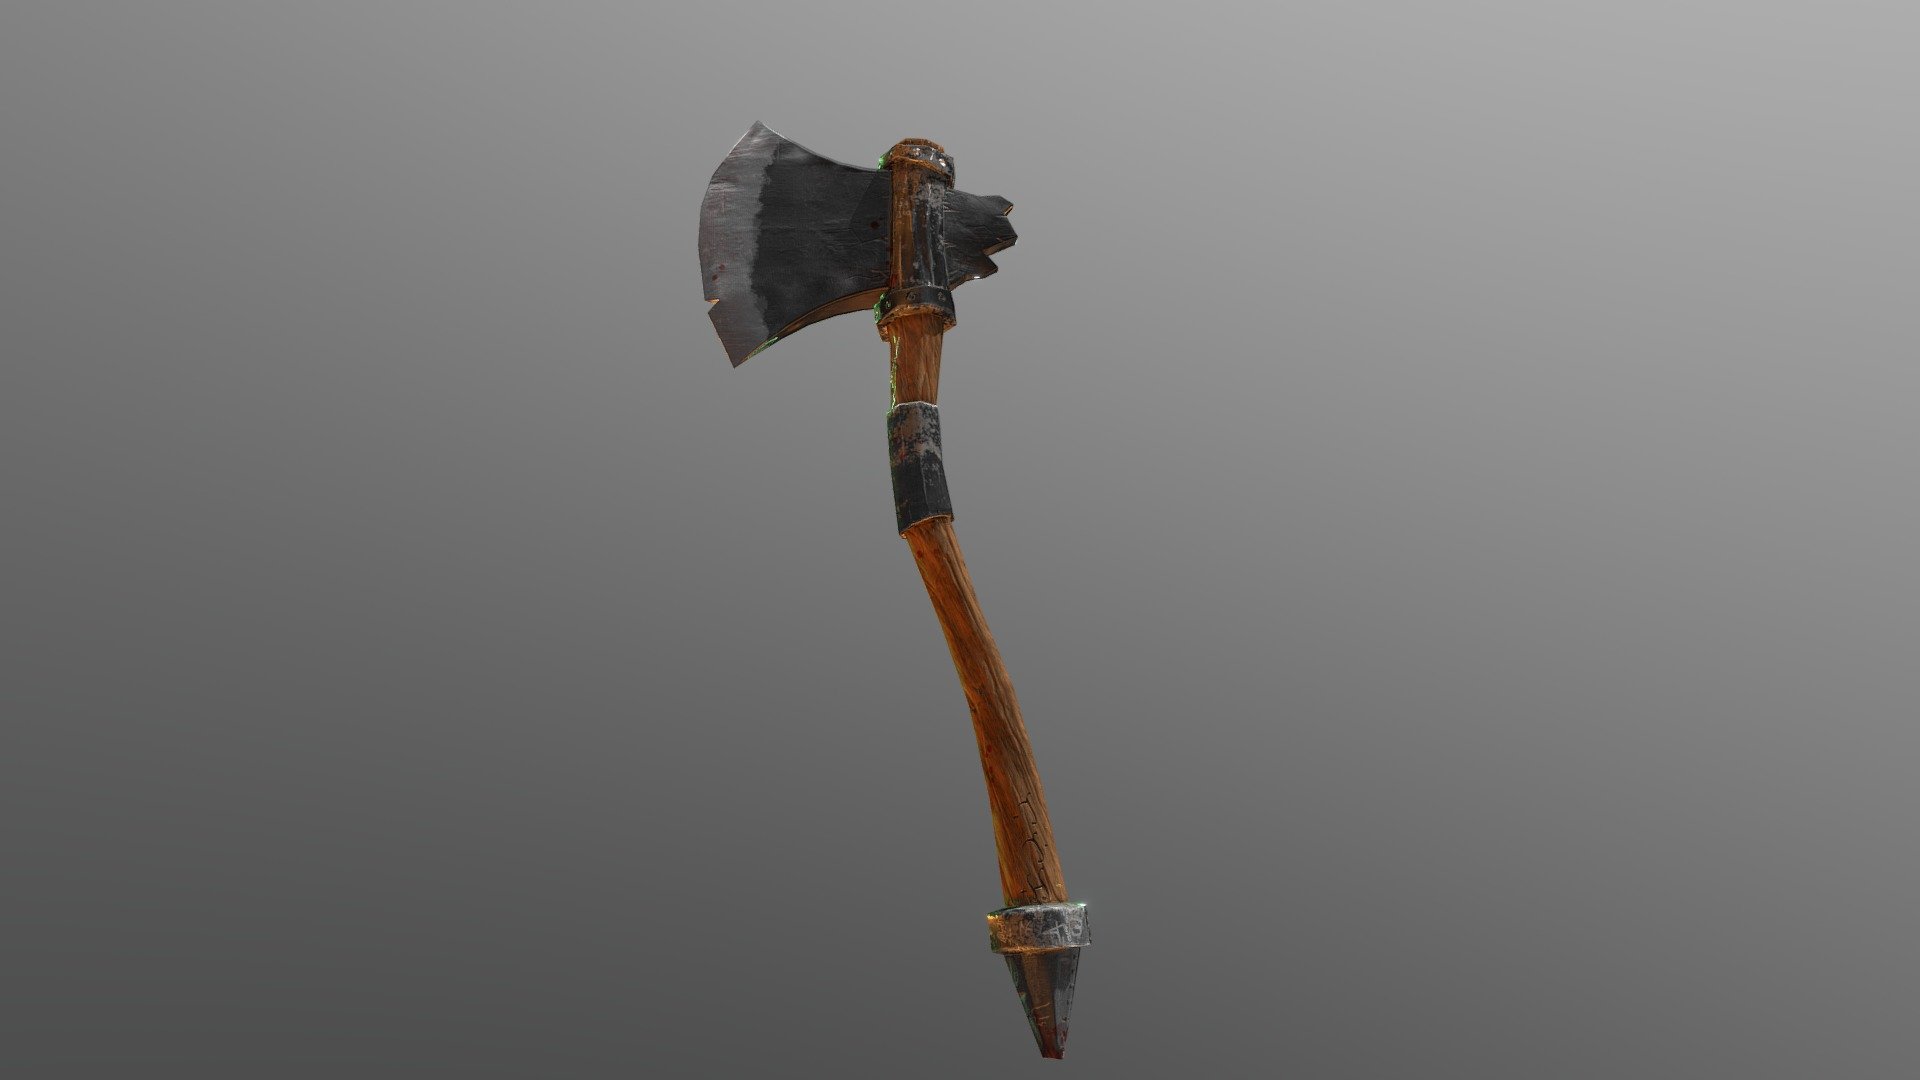 Low Poly Axe Download Free 3d Model By 2tik Baglini 670028f - military axe roblox